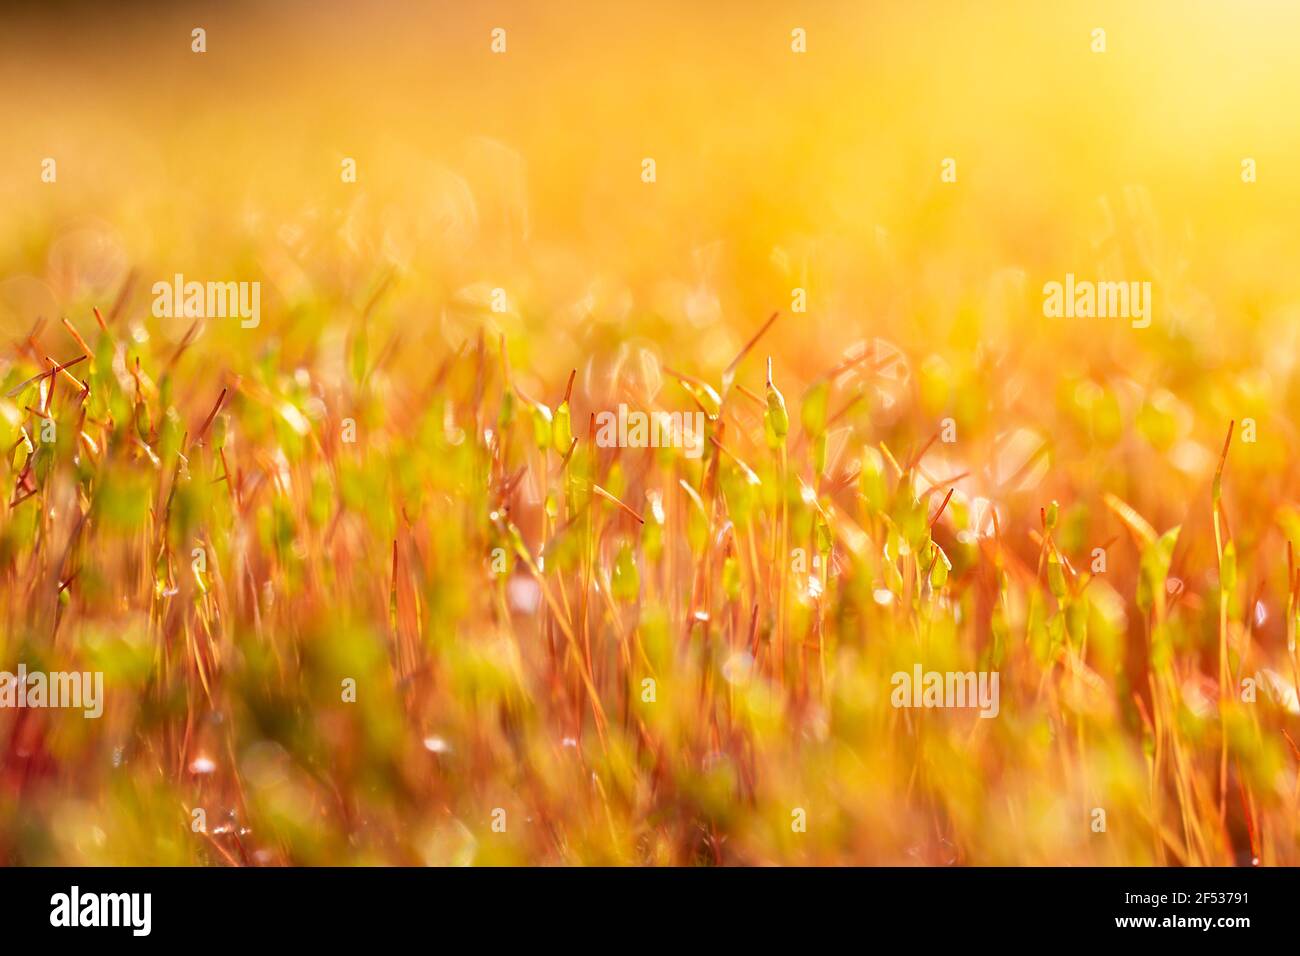 Macro photo of pohlia nutans moss at surface level with raindrops, dew, water droplets. Spring, plant background Stock Photo